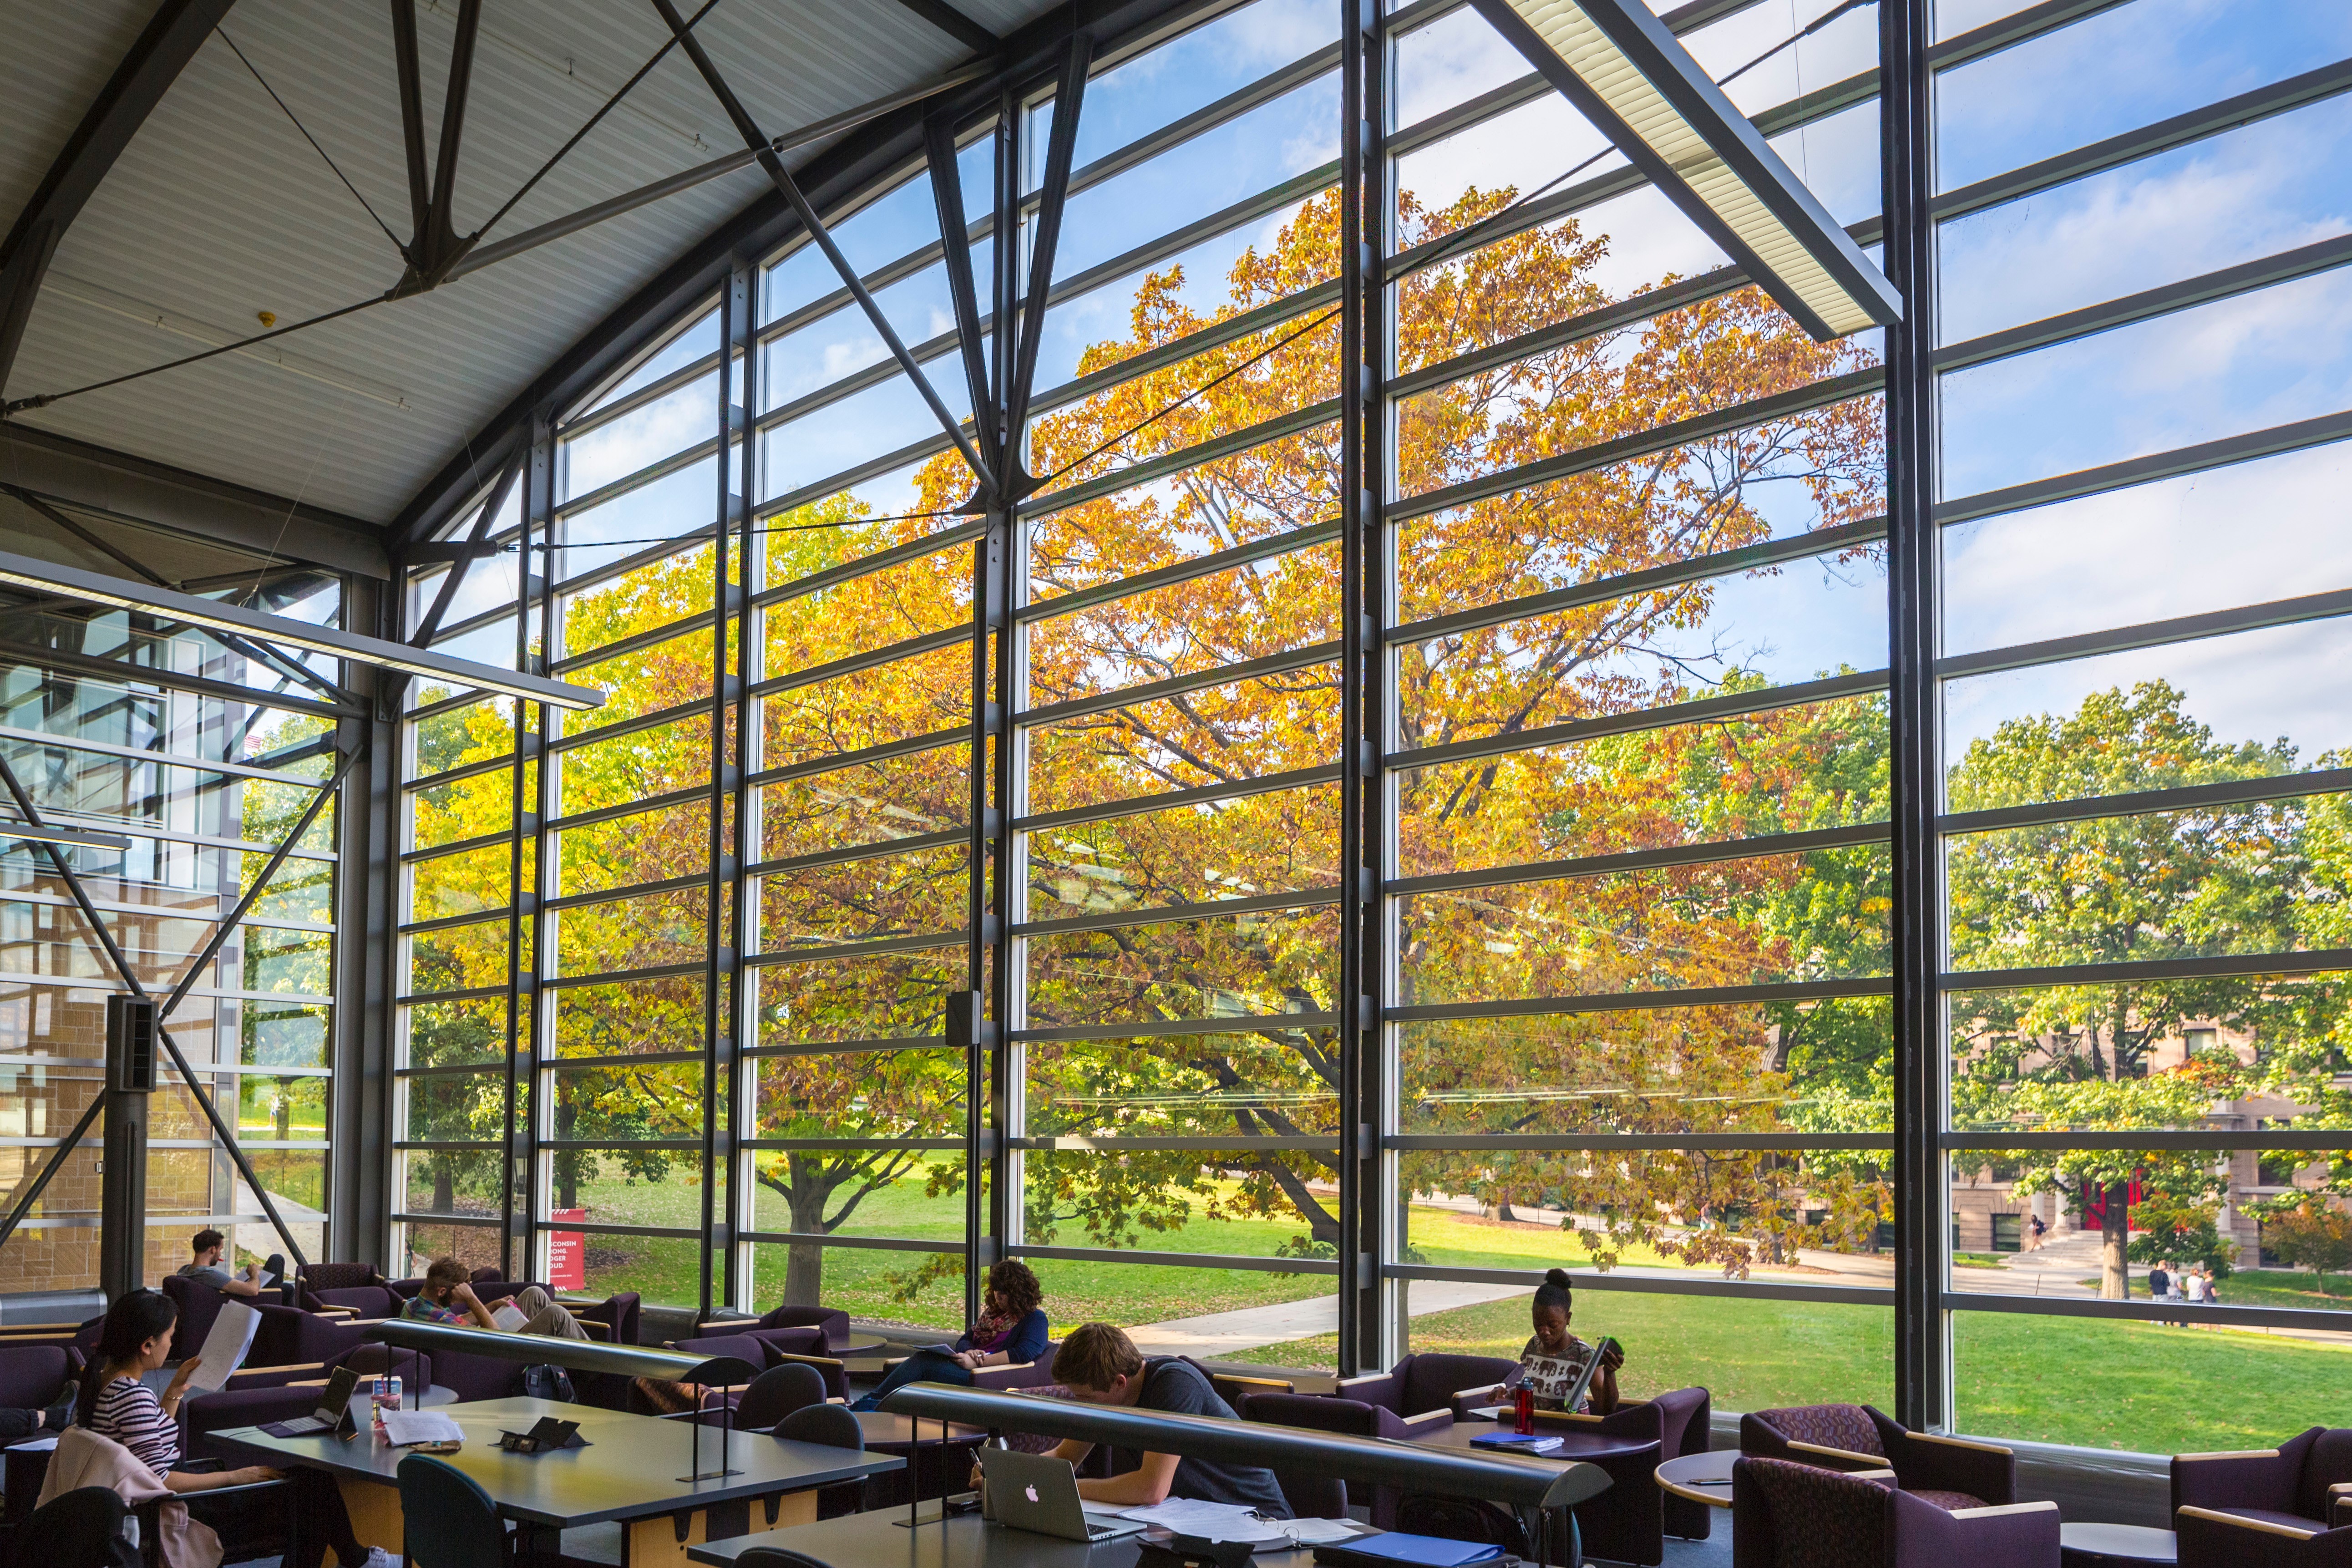 A photo of the interior of the Law School Library featuring long horizontal windows and an arched roof with colorful yellow and orange autumn leaves on trees visible outside on the green space of Bascom Hill.